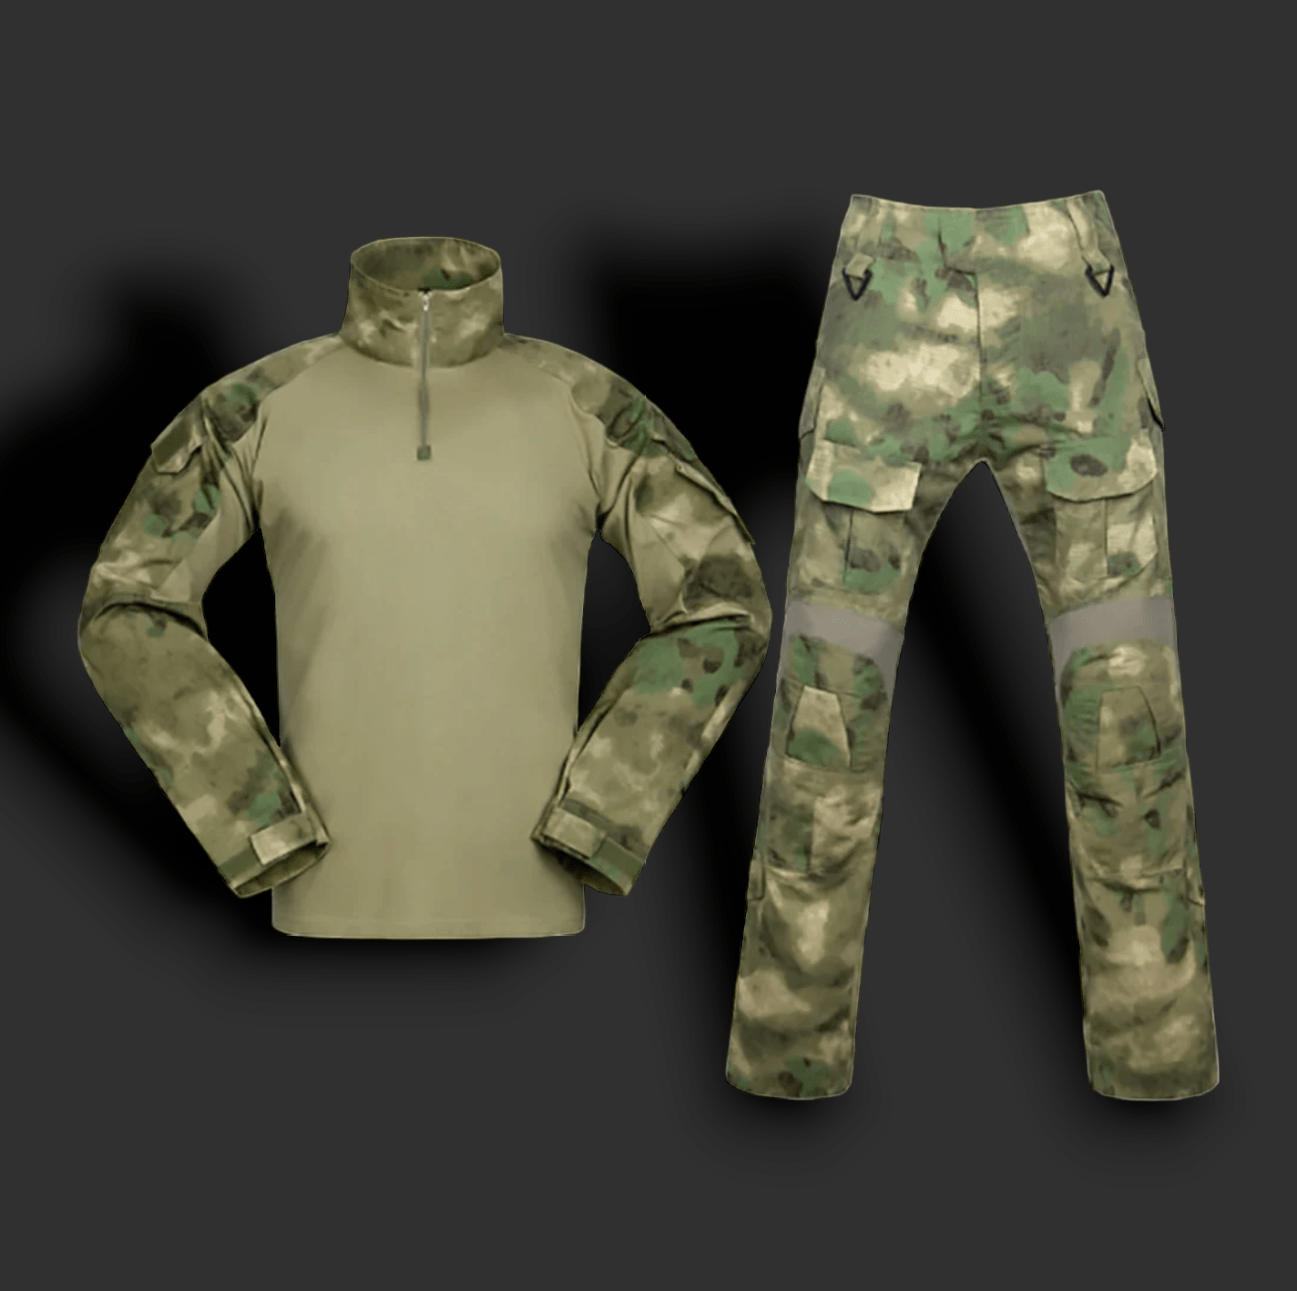 Tactical Uniforms Men Rip-stop Camouflage Military Clothing Sets G3 Army Suit Airsoft Paintball Multicam Cargo Pant Combat Shirt - BlasterMasters